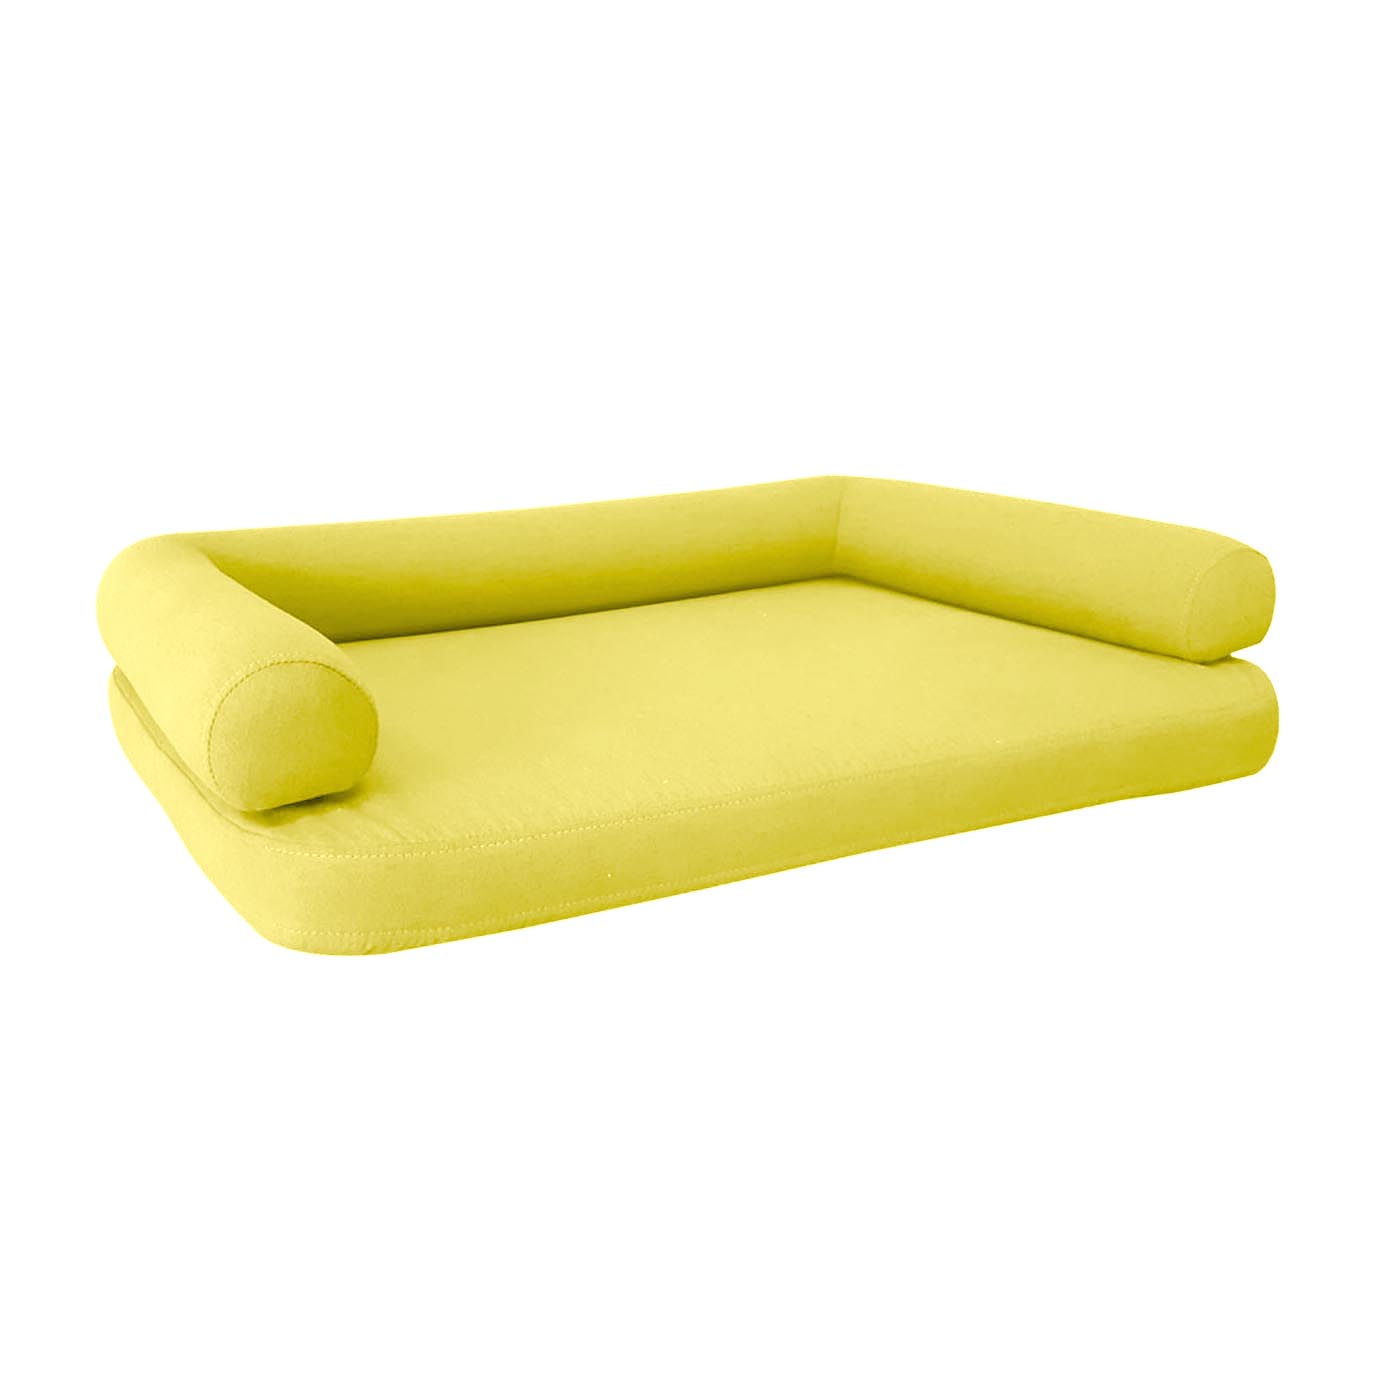 The Lime Pohovka Pet Bed